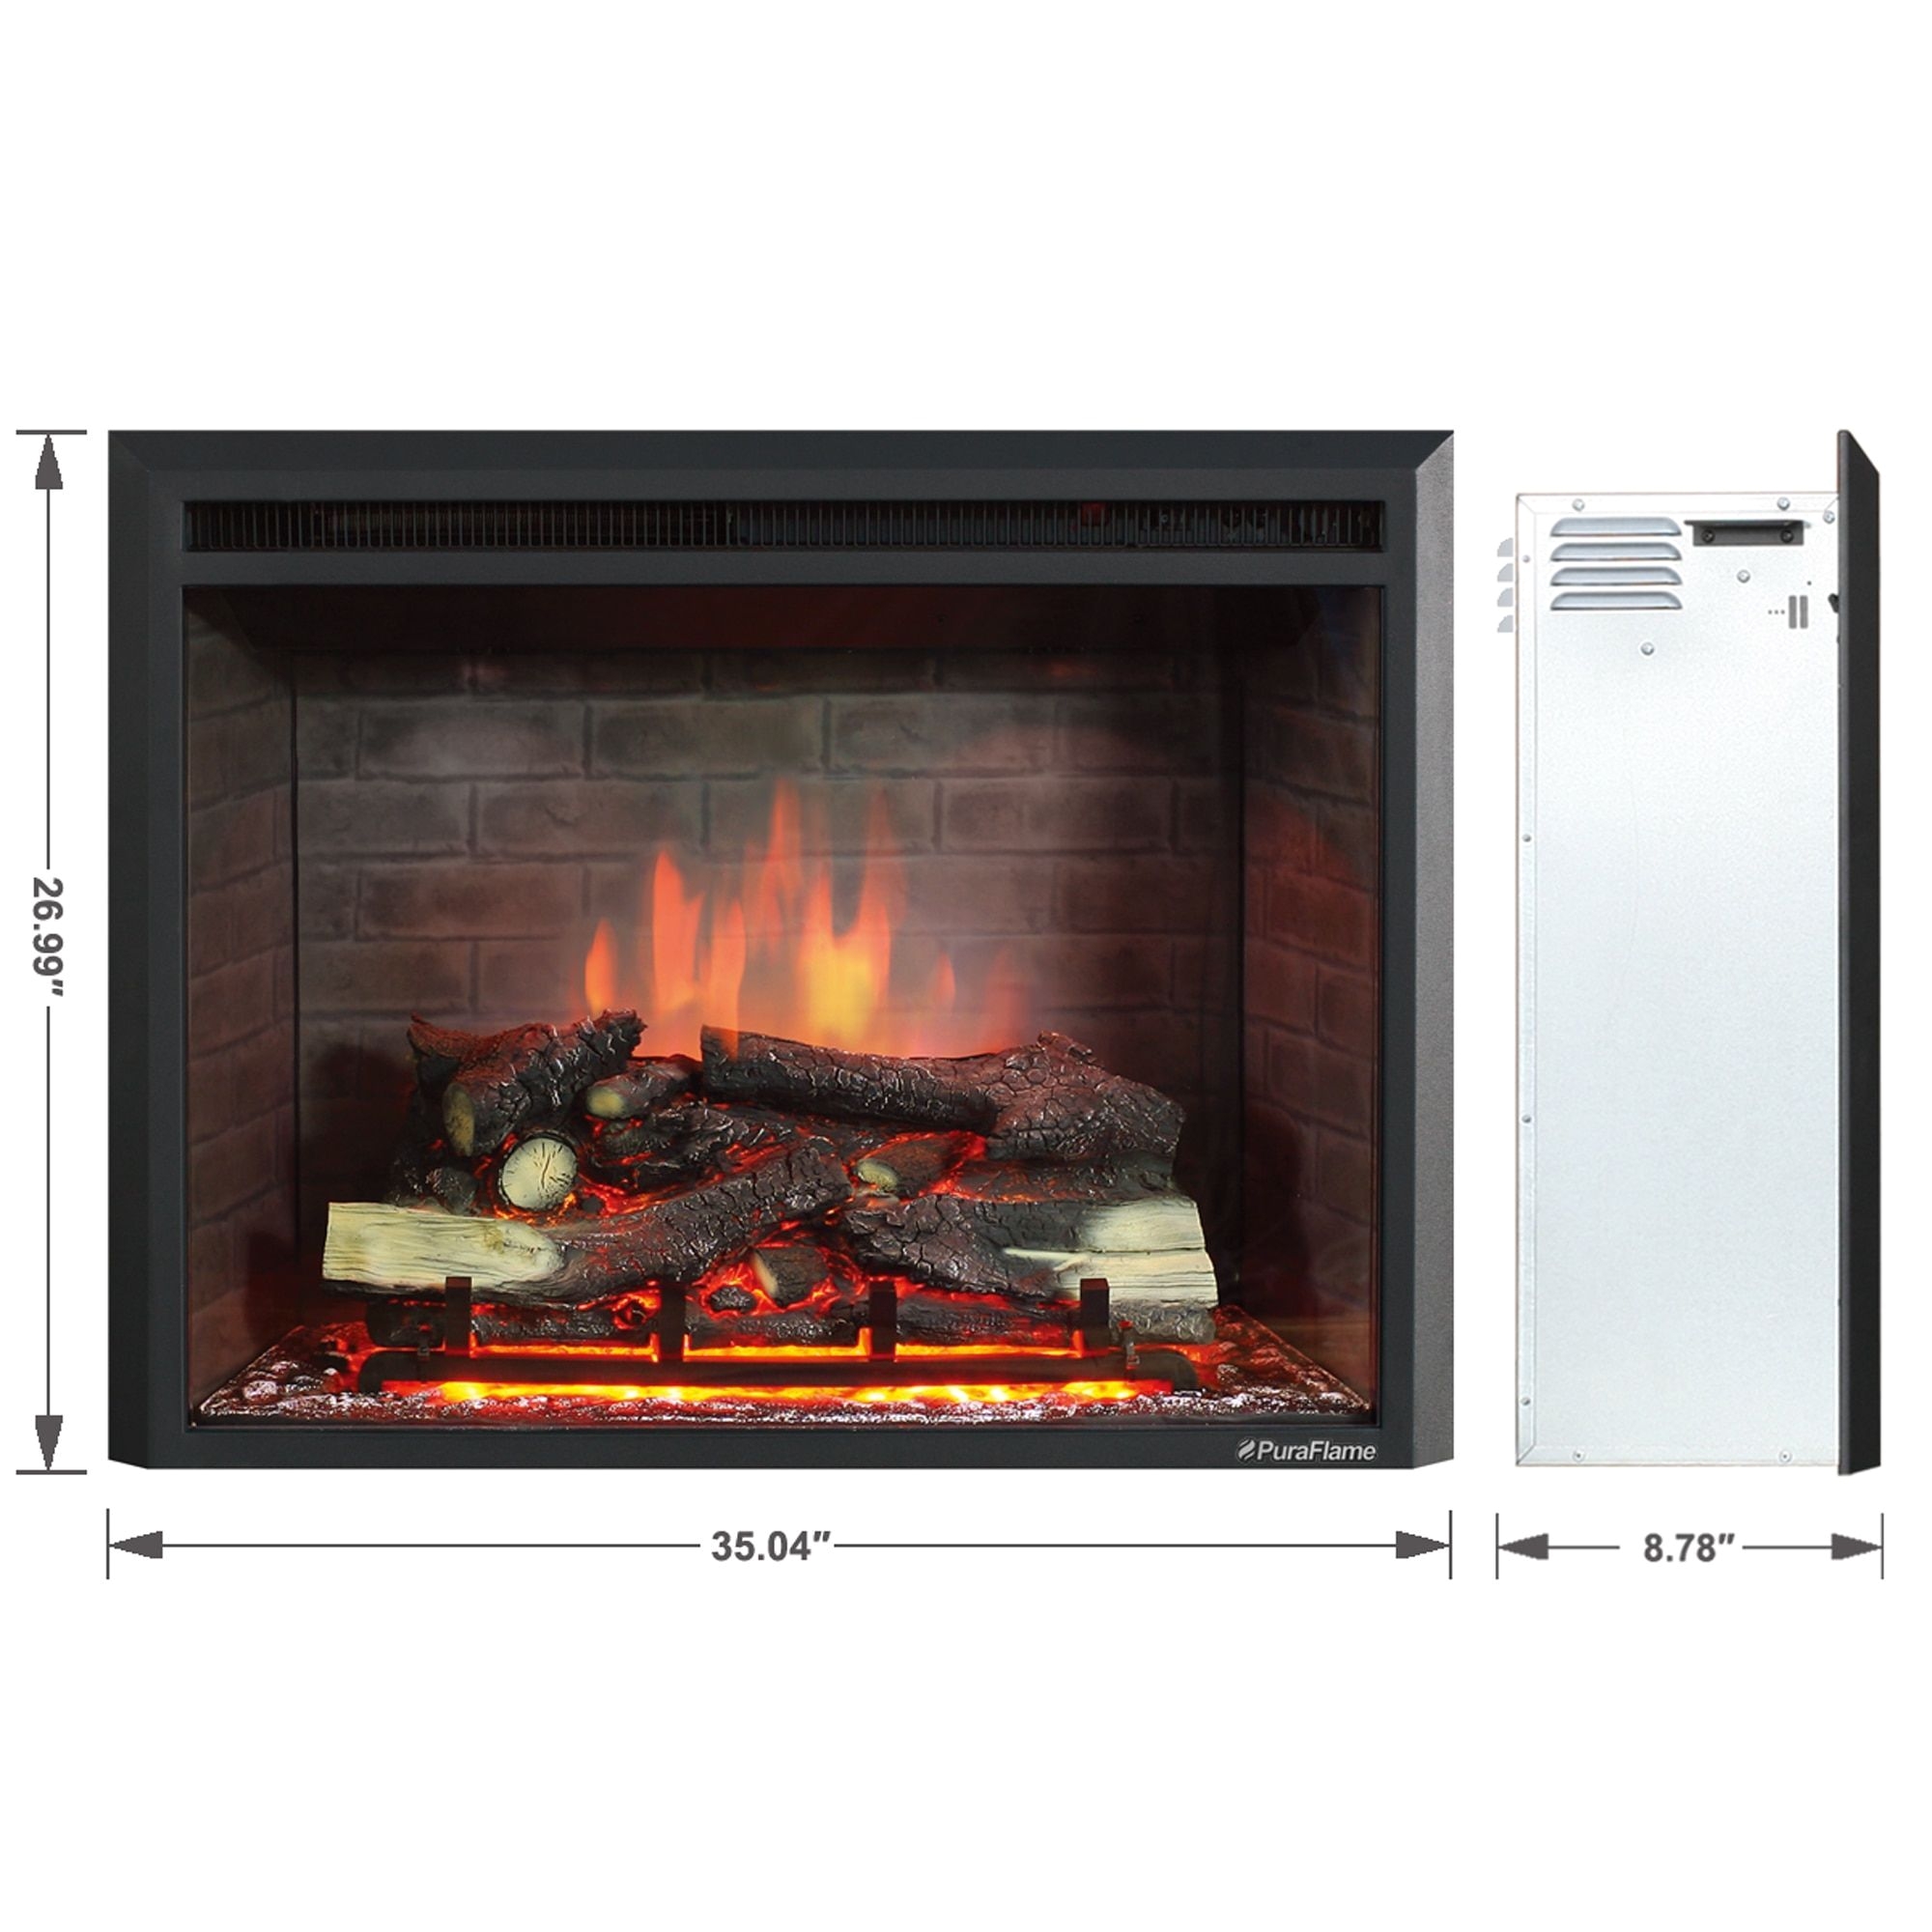 puraflame 33 inch western electric fireplace insert with remote control black glass